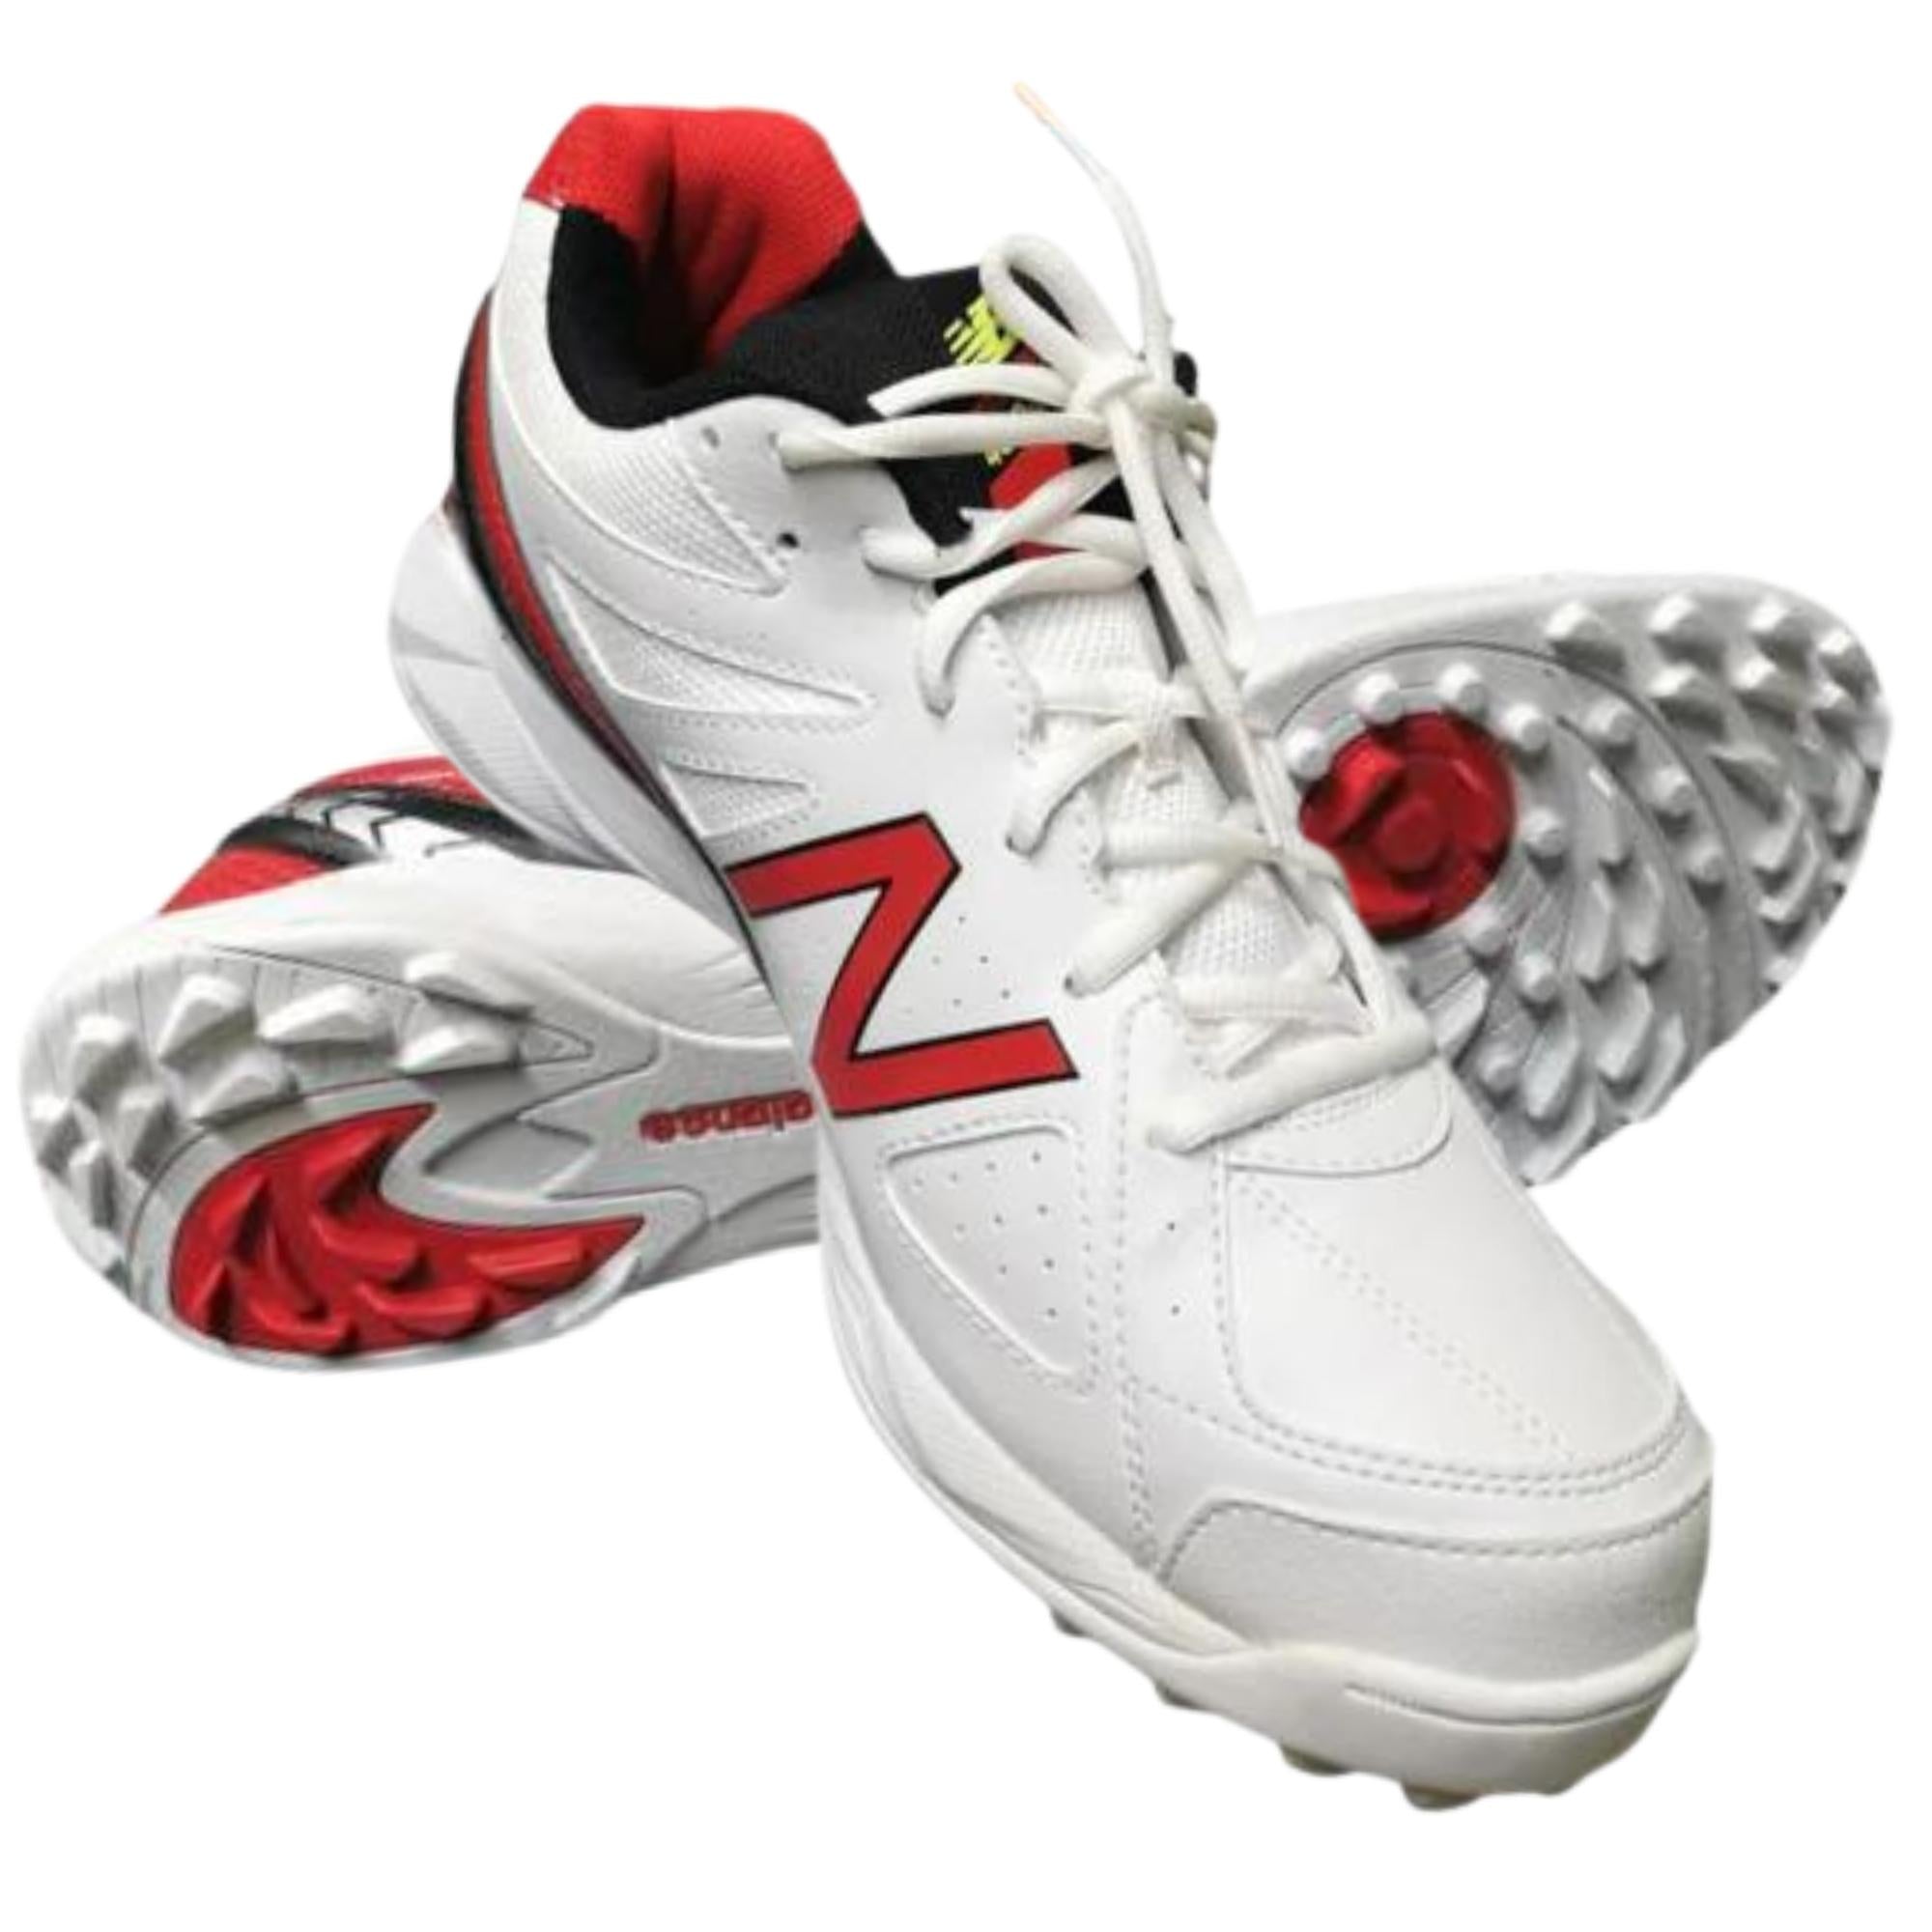 New Balance Cricket Shoes, Model CK4020R2 Rubber Sole Shoe - Red/White